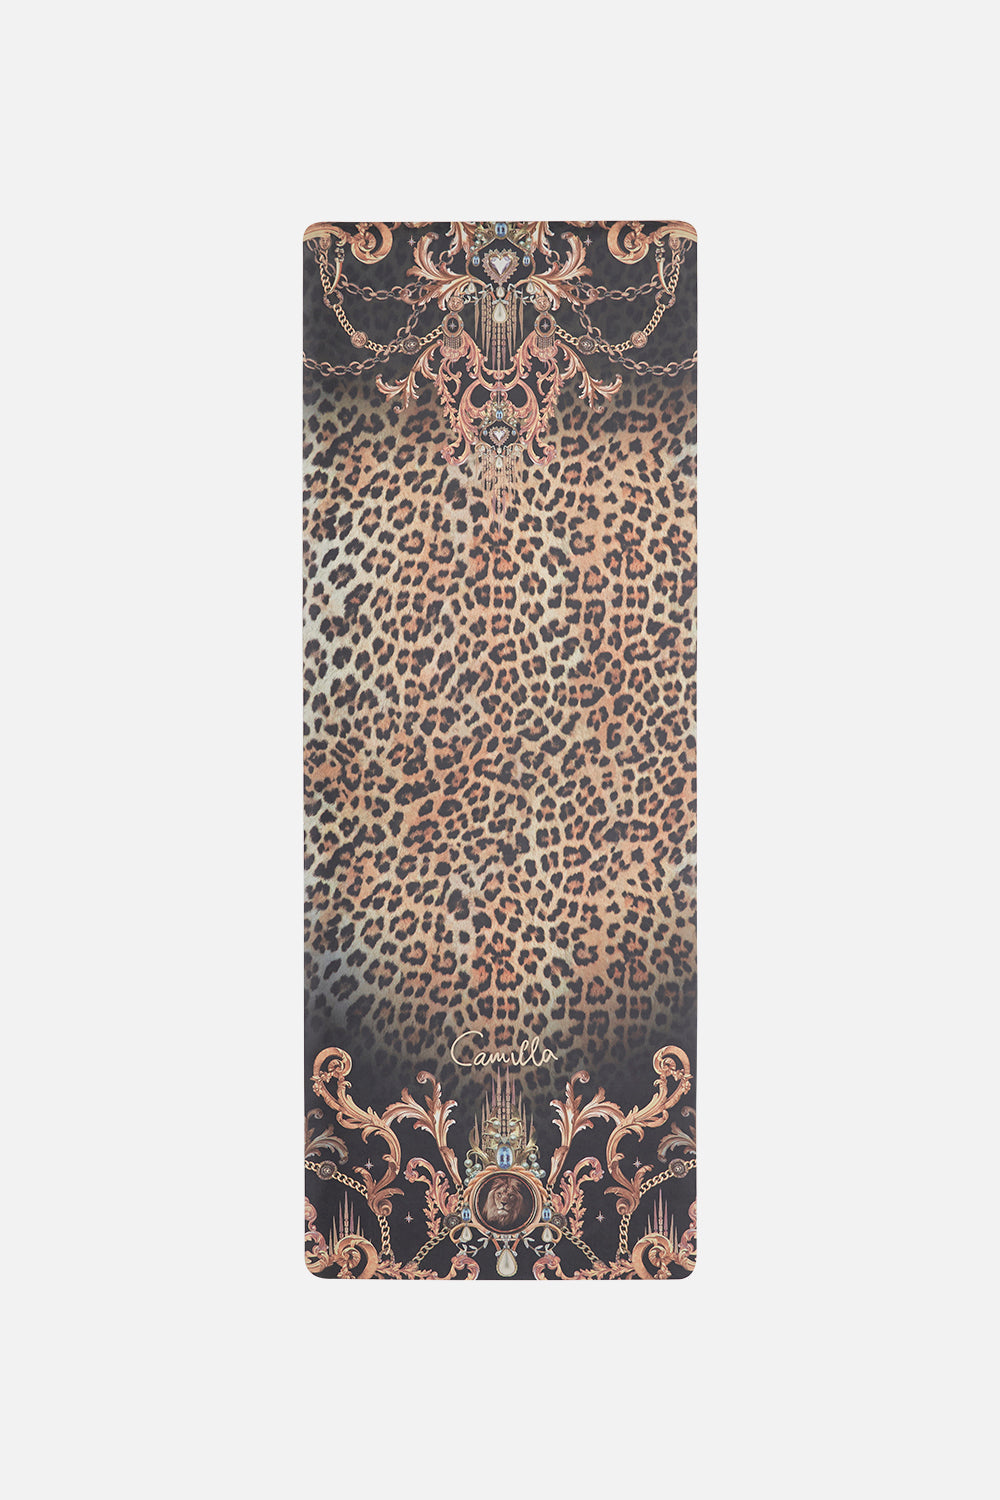 Product view of CAMILLA leopard print yoga mat in Running In The Wild print